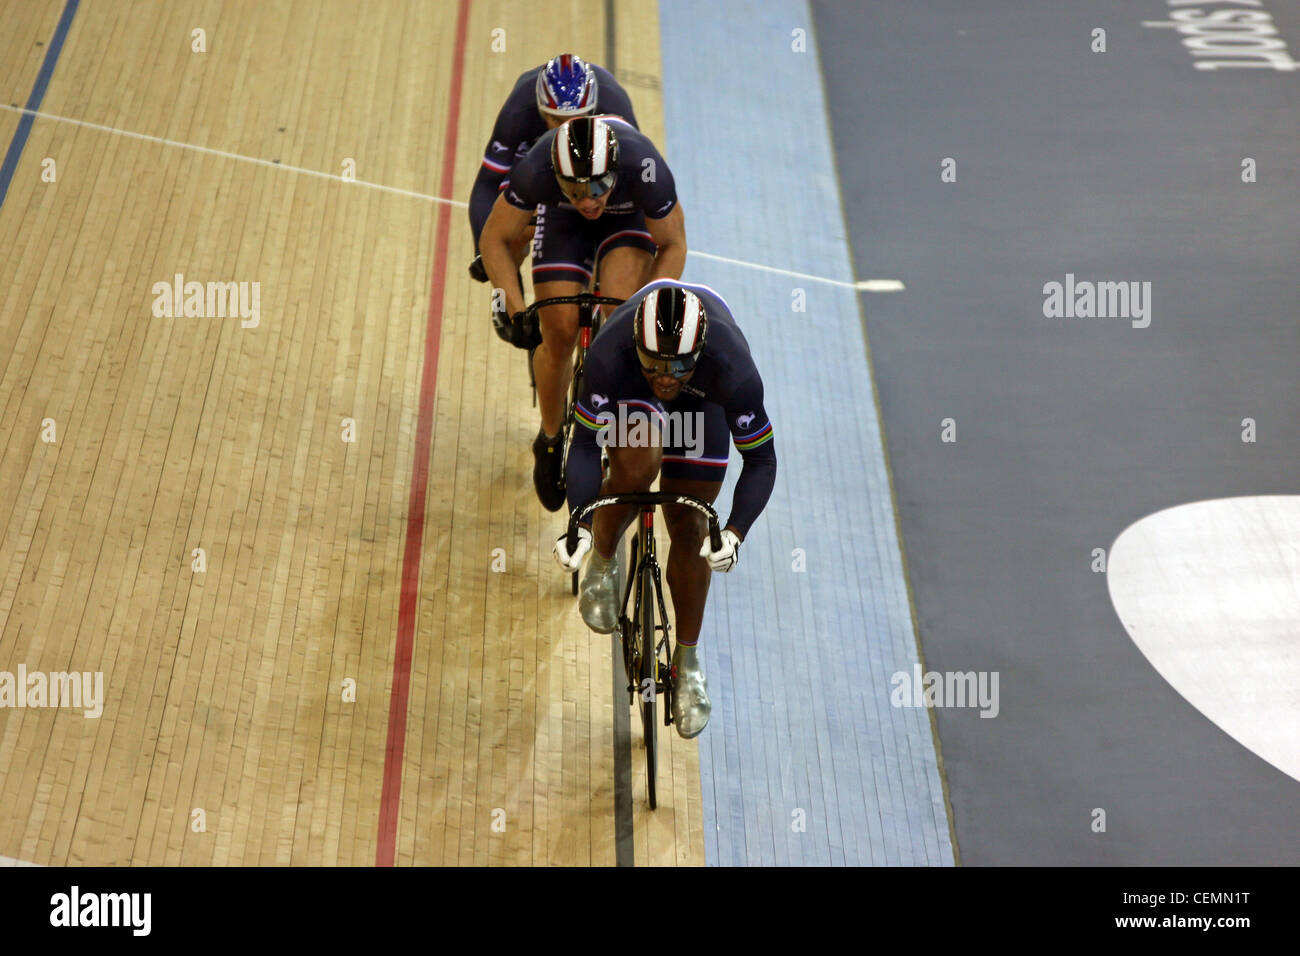 Gregory BAUGE, Mickael D'ALMEIDA, Kevin SIREAU (FRA) in the Men's Team Sprint at the UCI Track Cycling World Cup Velodrome. Stock Photo